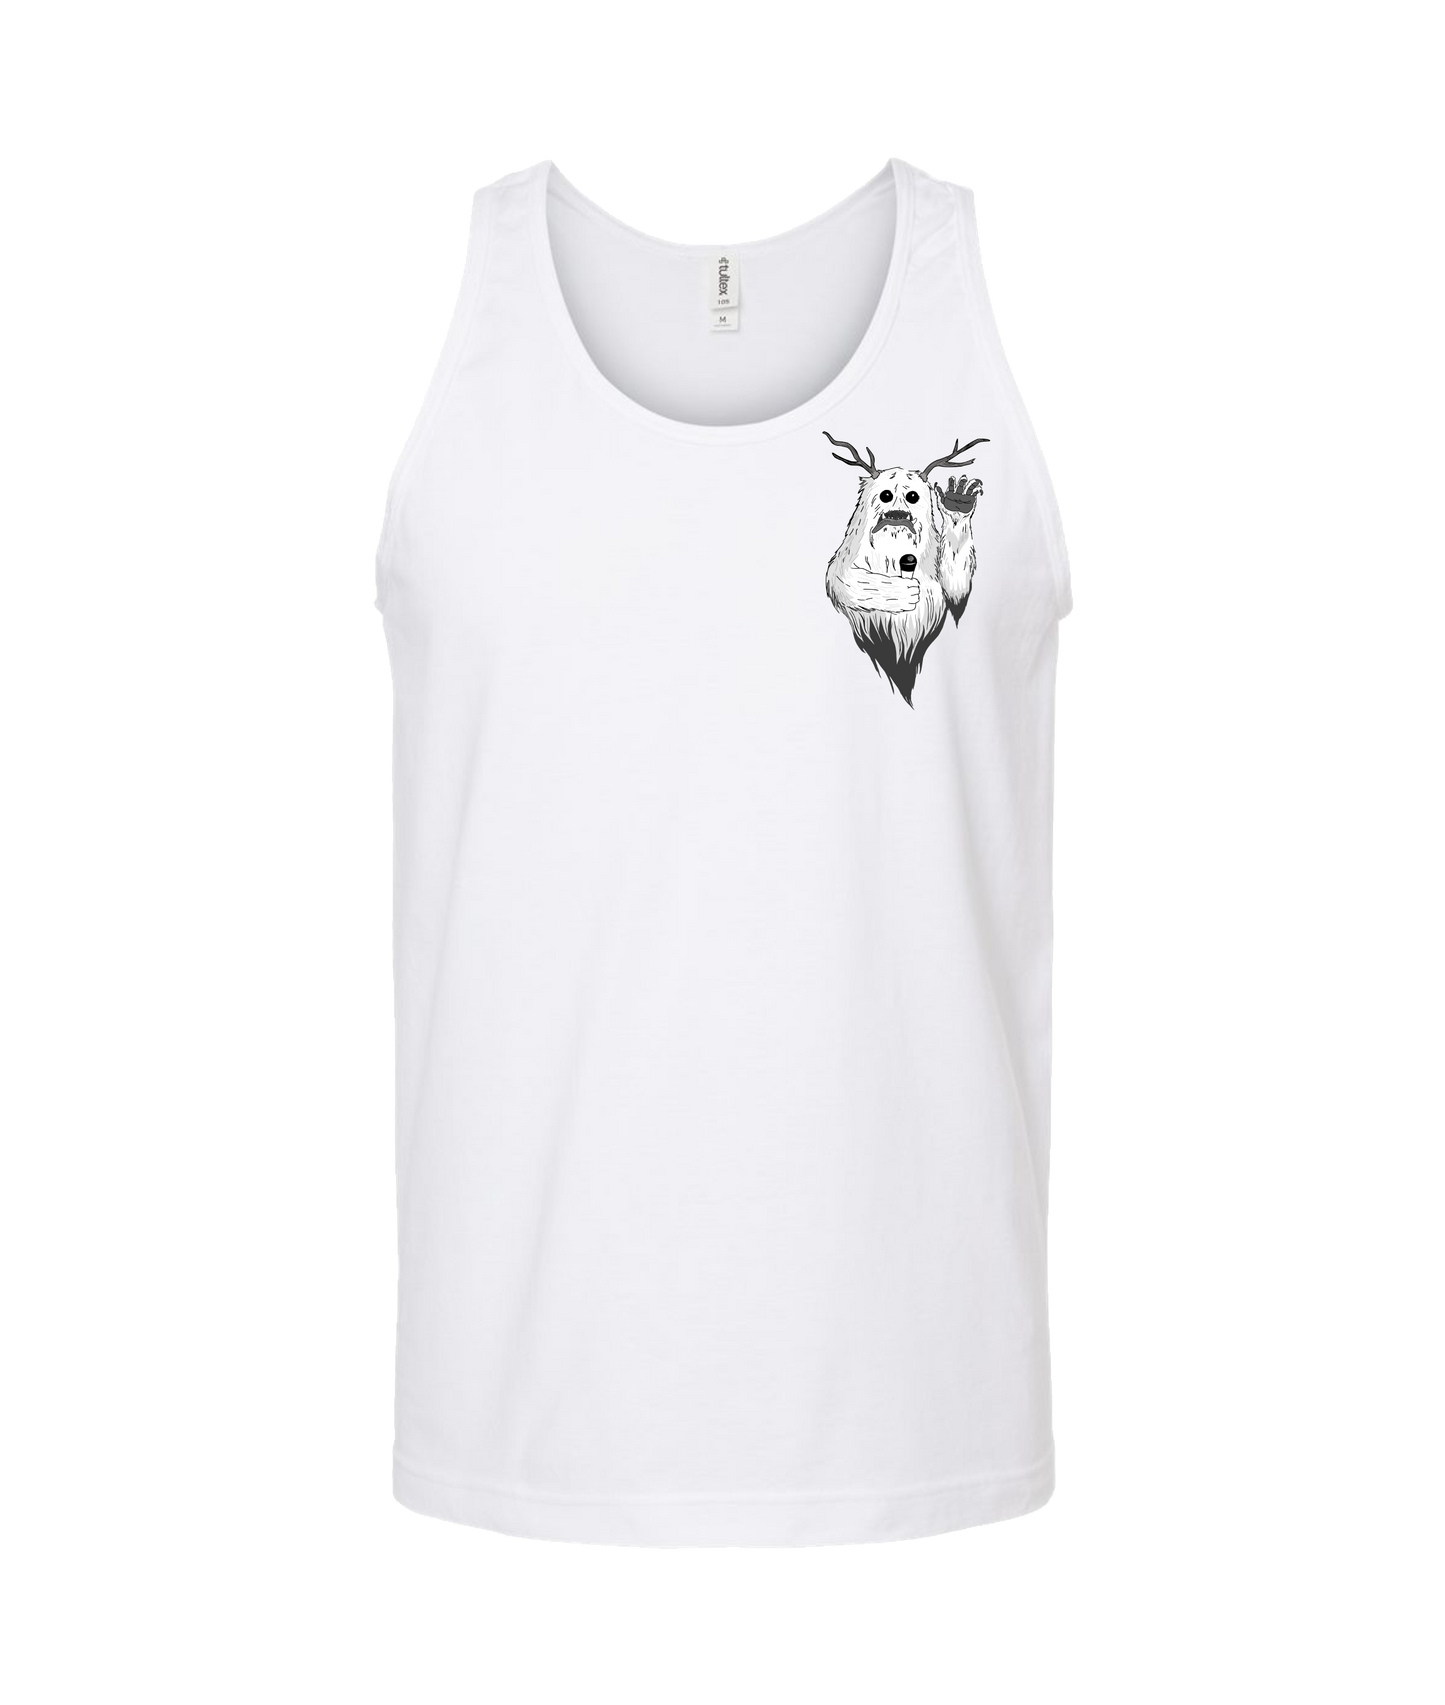 Sparks Across Darkness - Sparky - White Tank Top